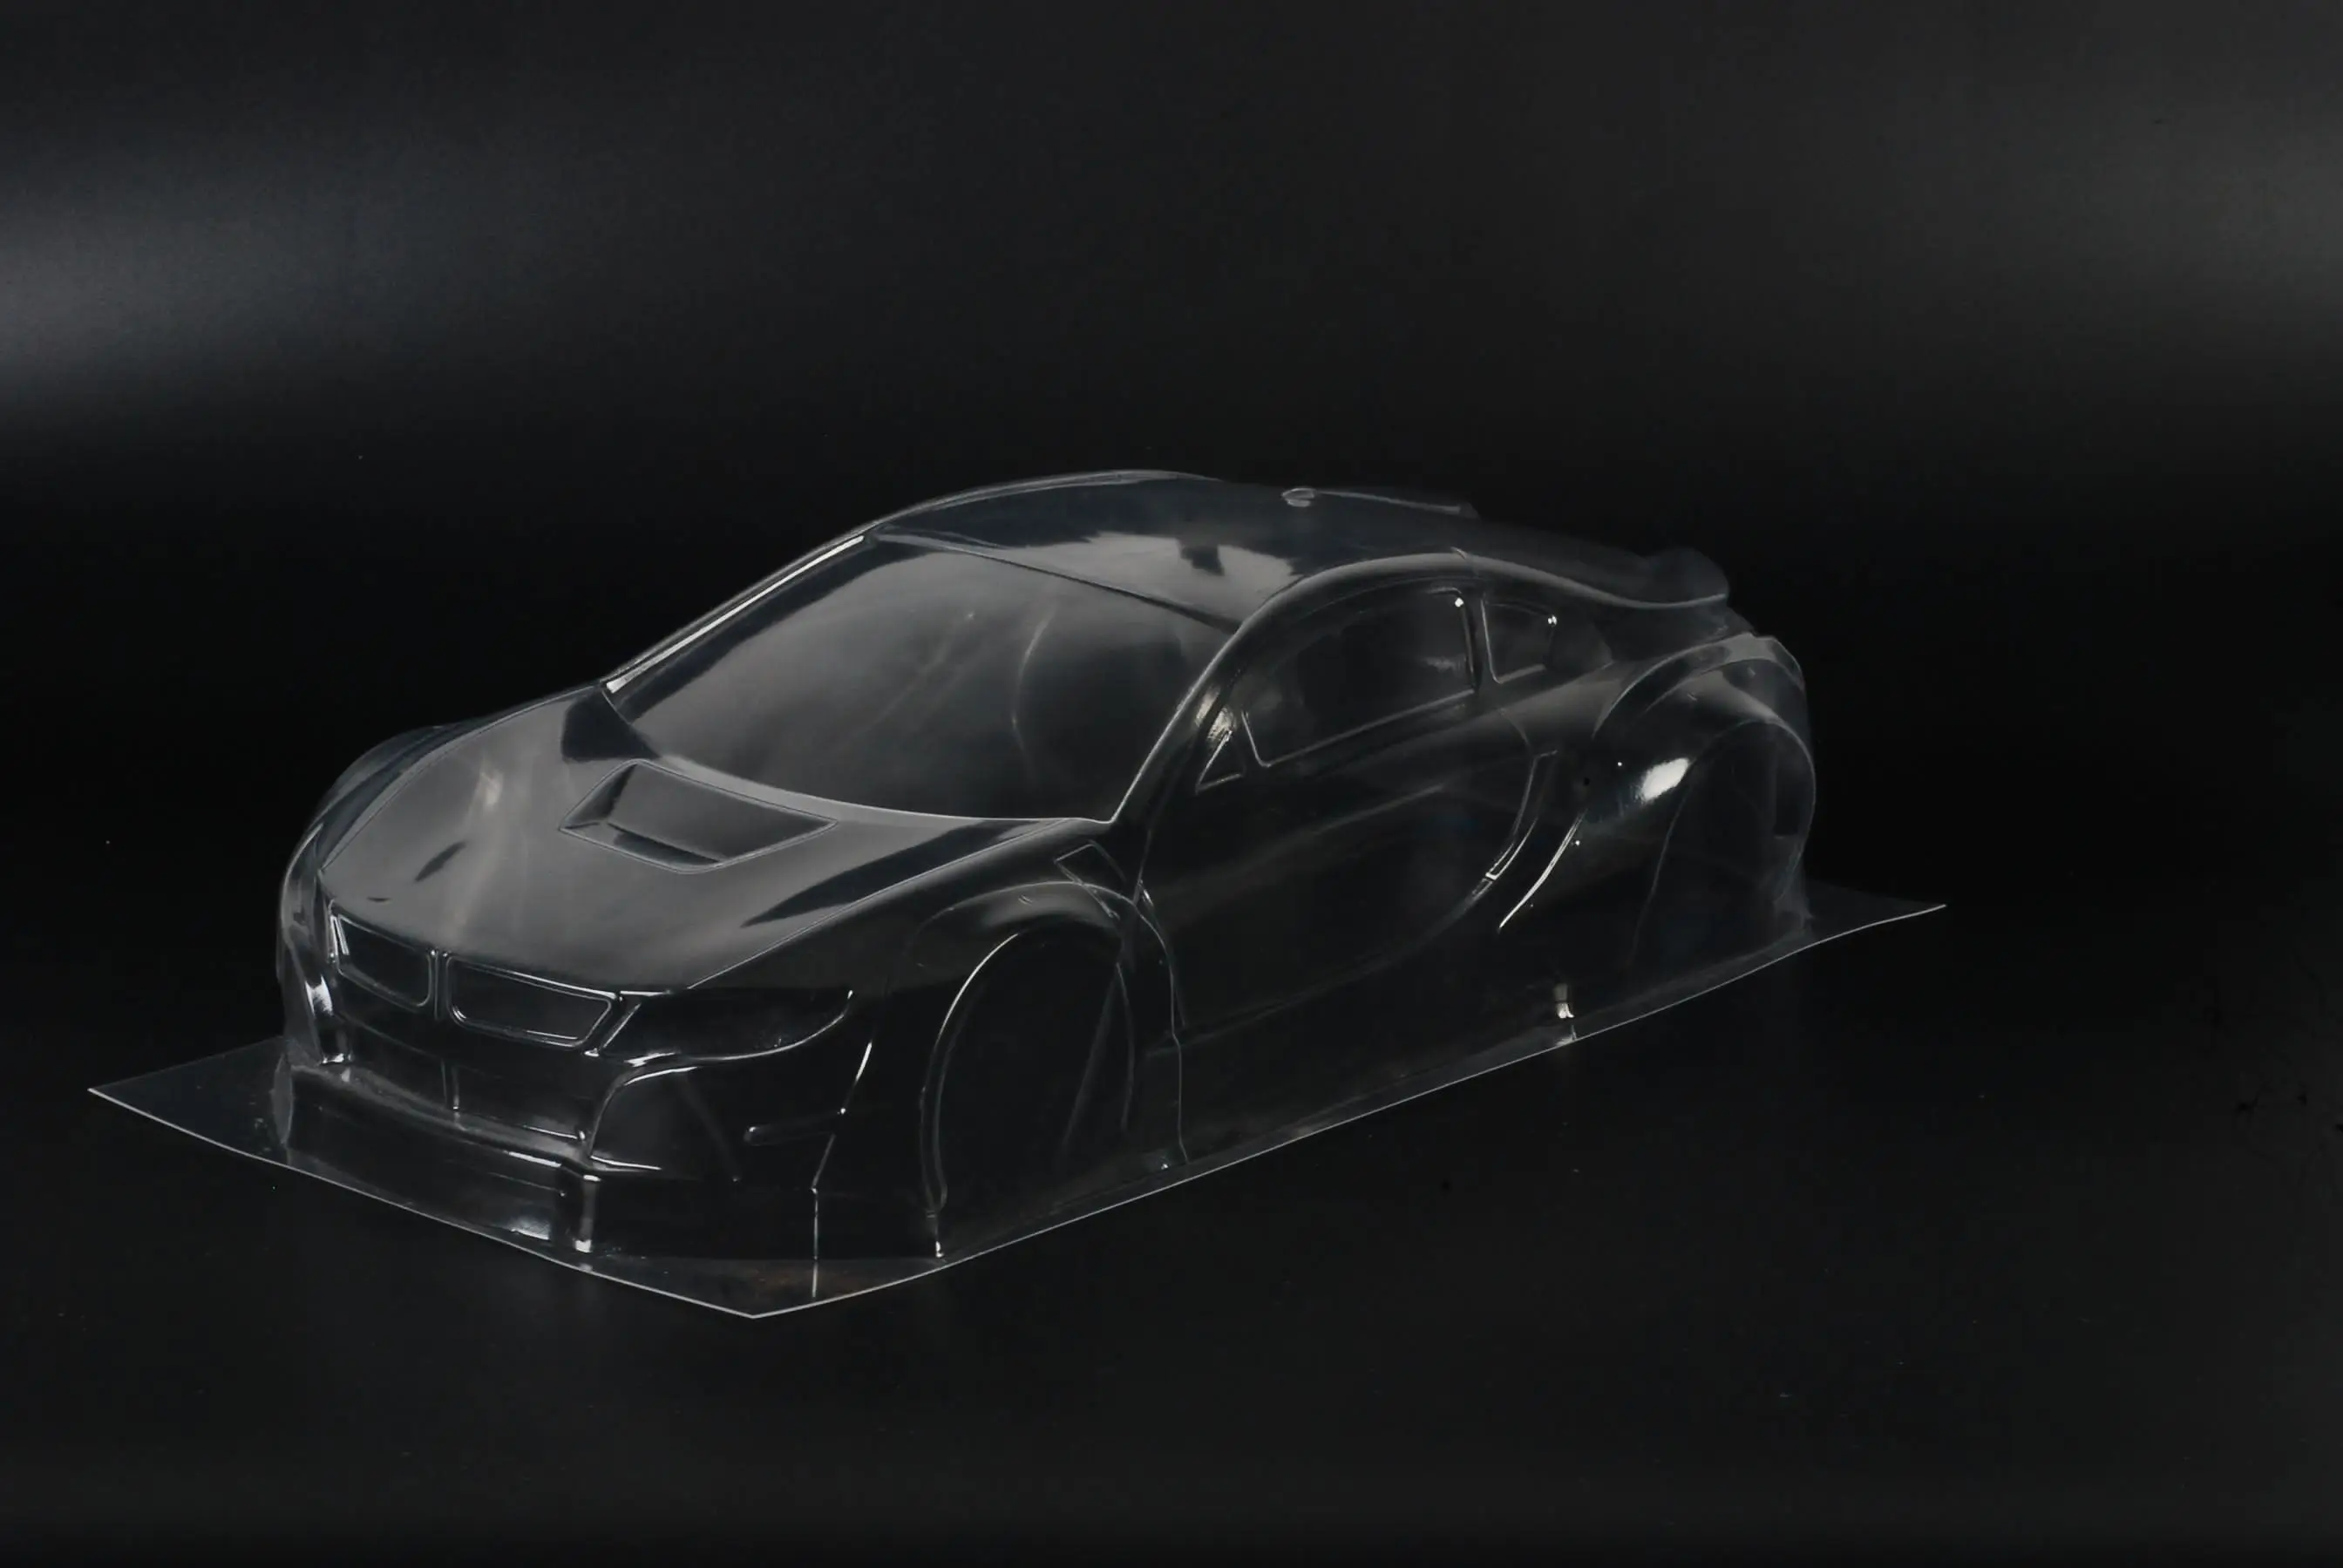 1/10 RC PC shell body I8 super car LB Wide body no paint shell 200mm width 260mm wheelbase for 1/10 drift touring hsp mst d5s enlarge